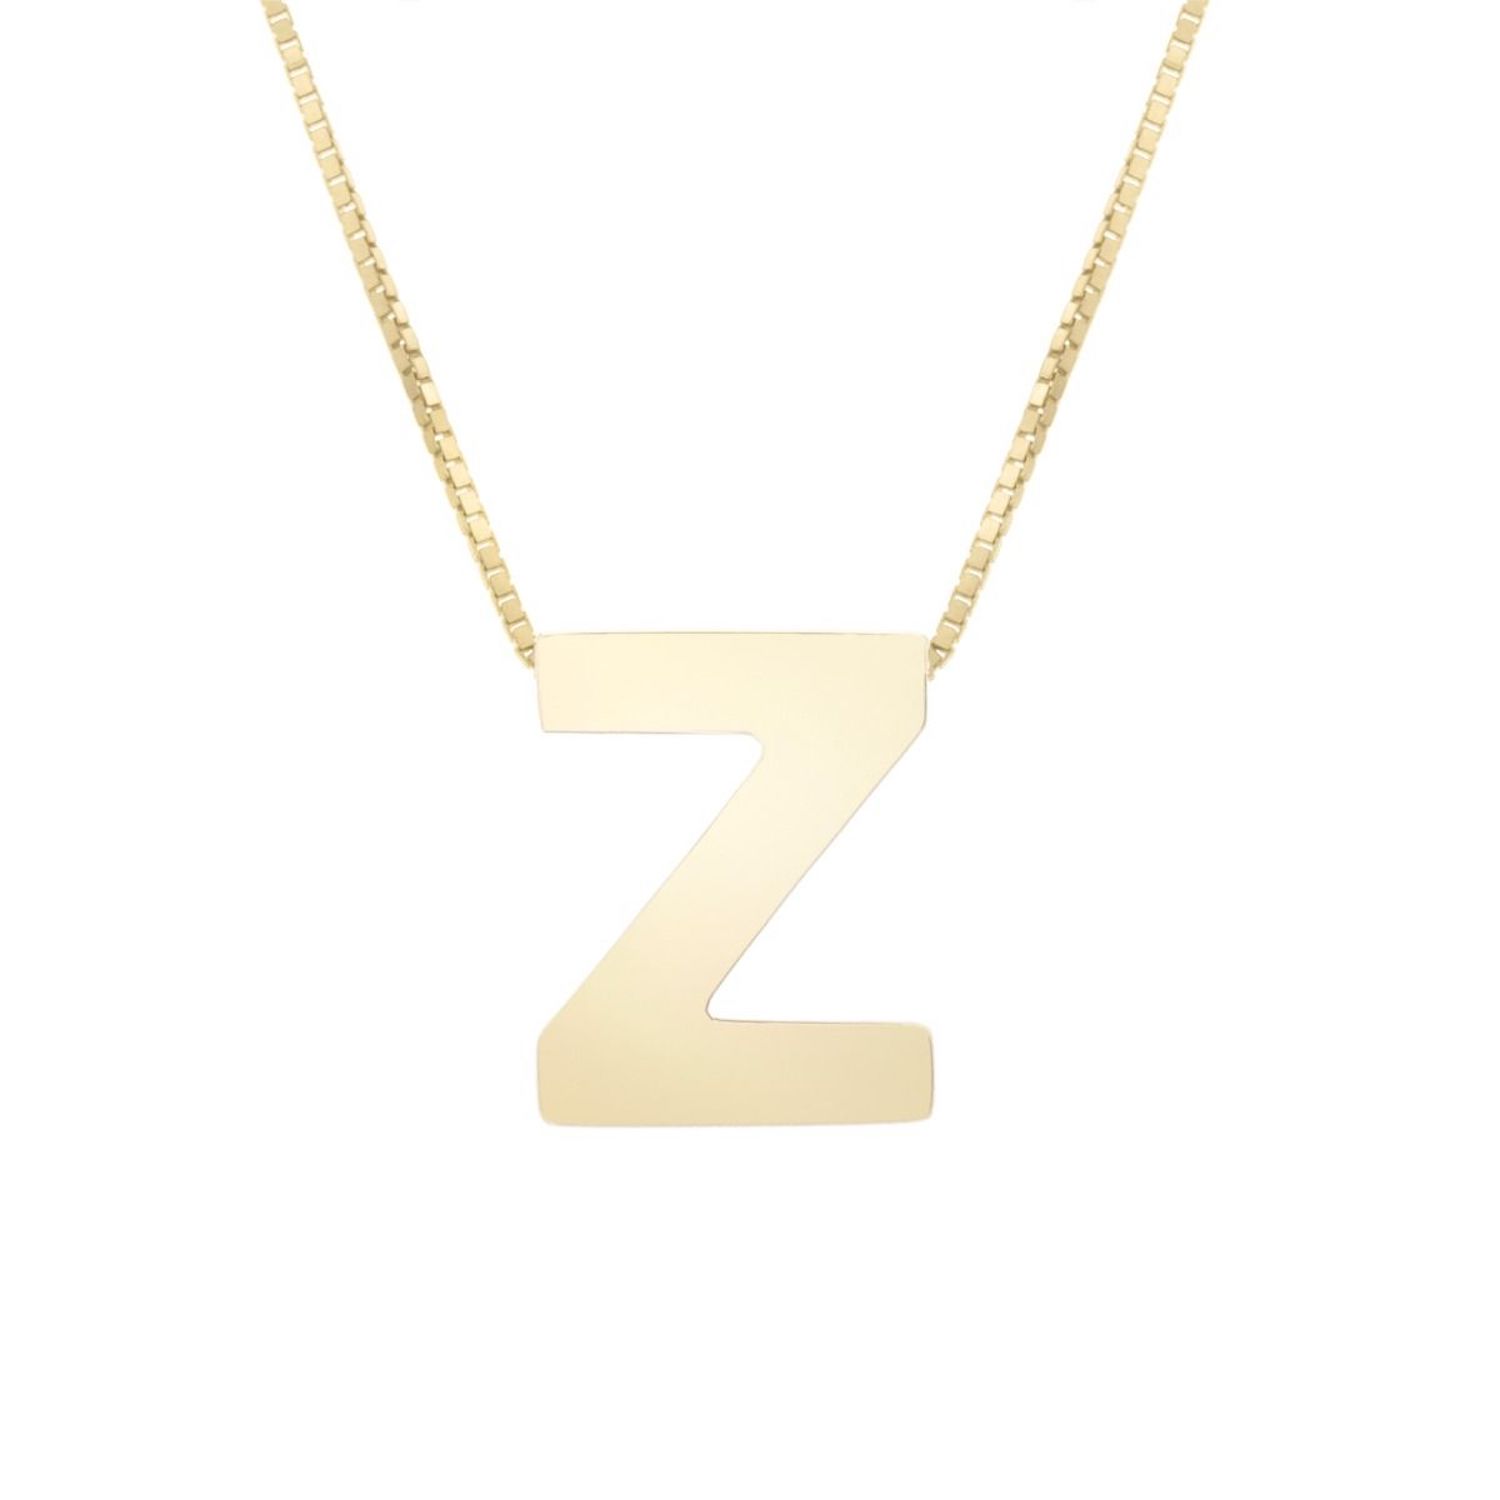 14K Yellow Gold Block Letter Initial Pendant Box Chain Necklace 16"-18" - Z